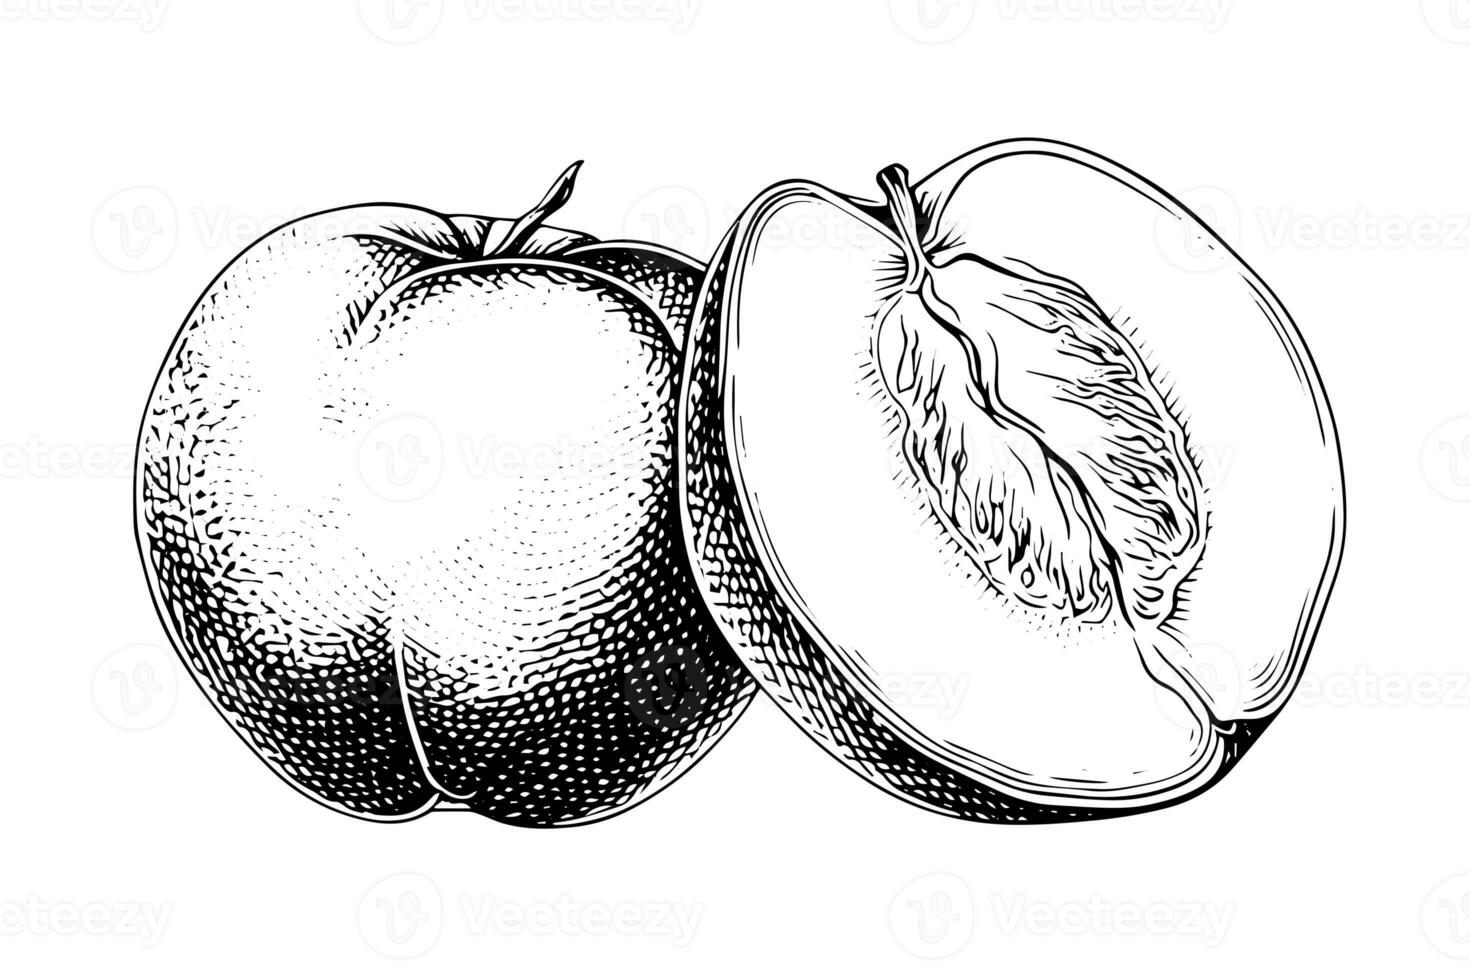 Peach or Apricot fruit hand drawn sketch in engraved style. photo